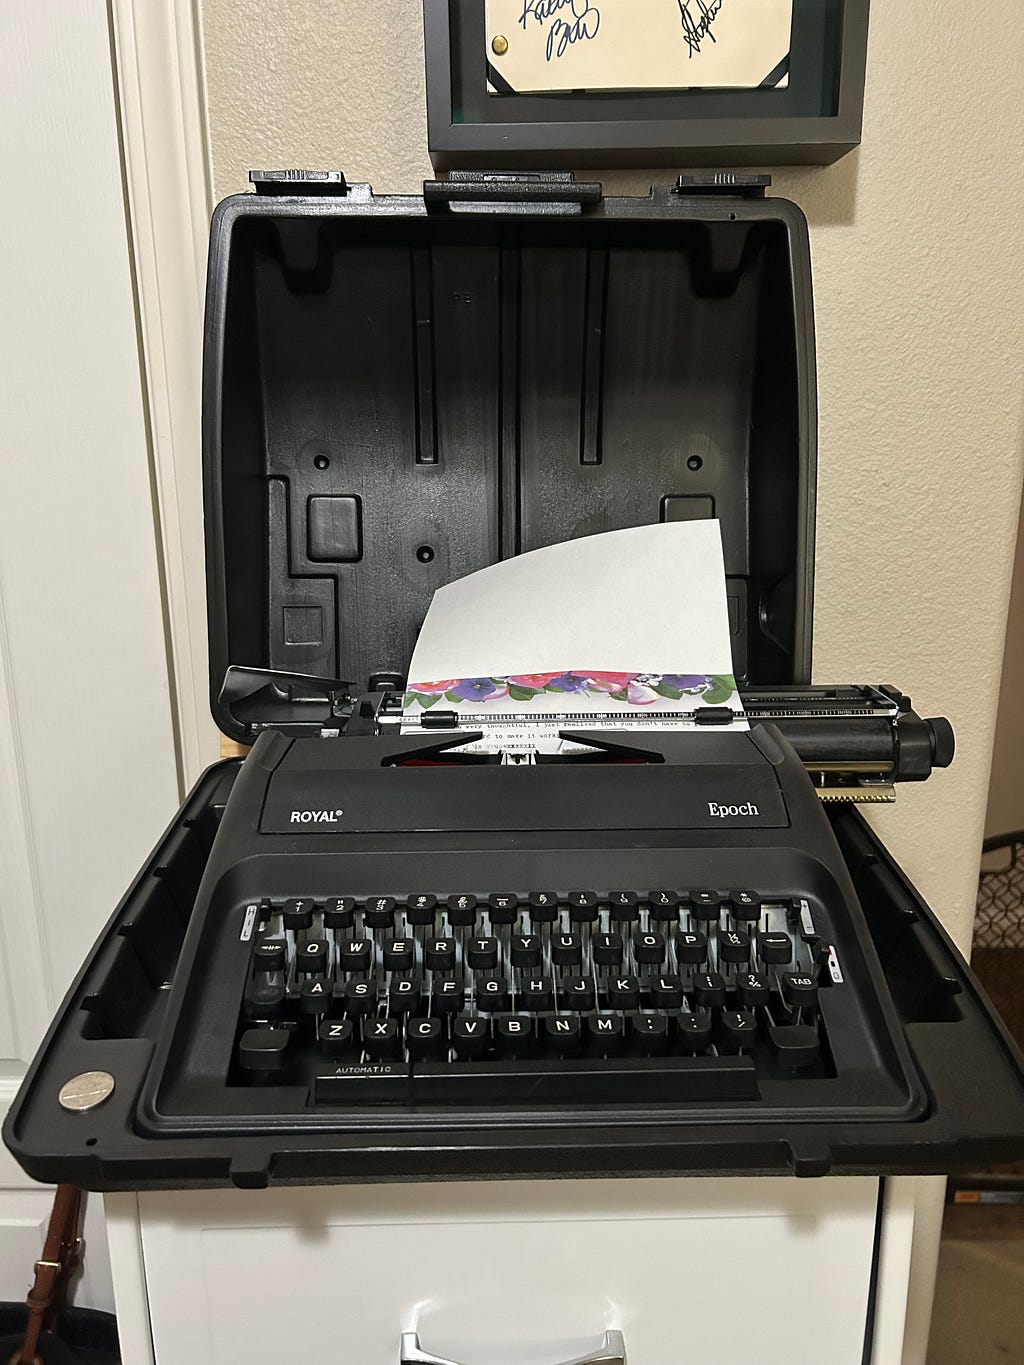 Manual typewriter with a piece of paper fed into the top